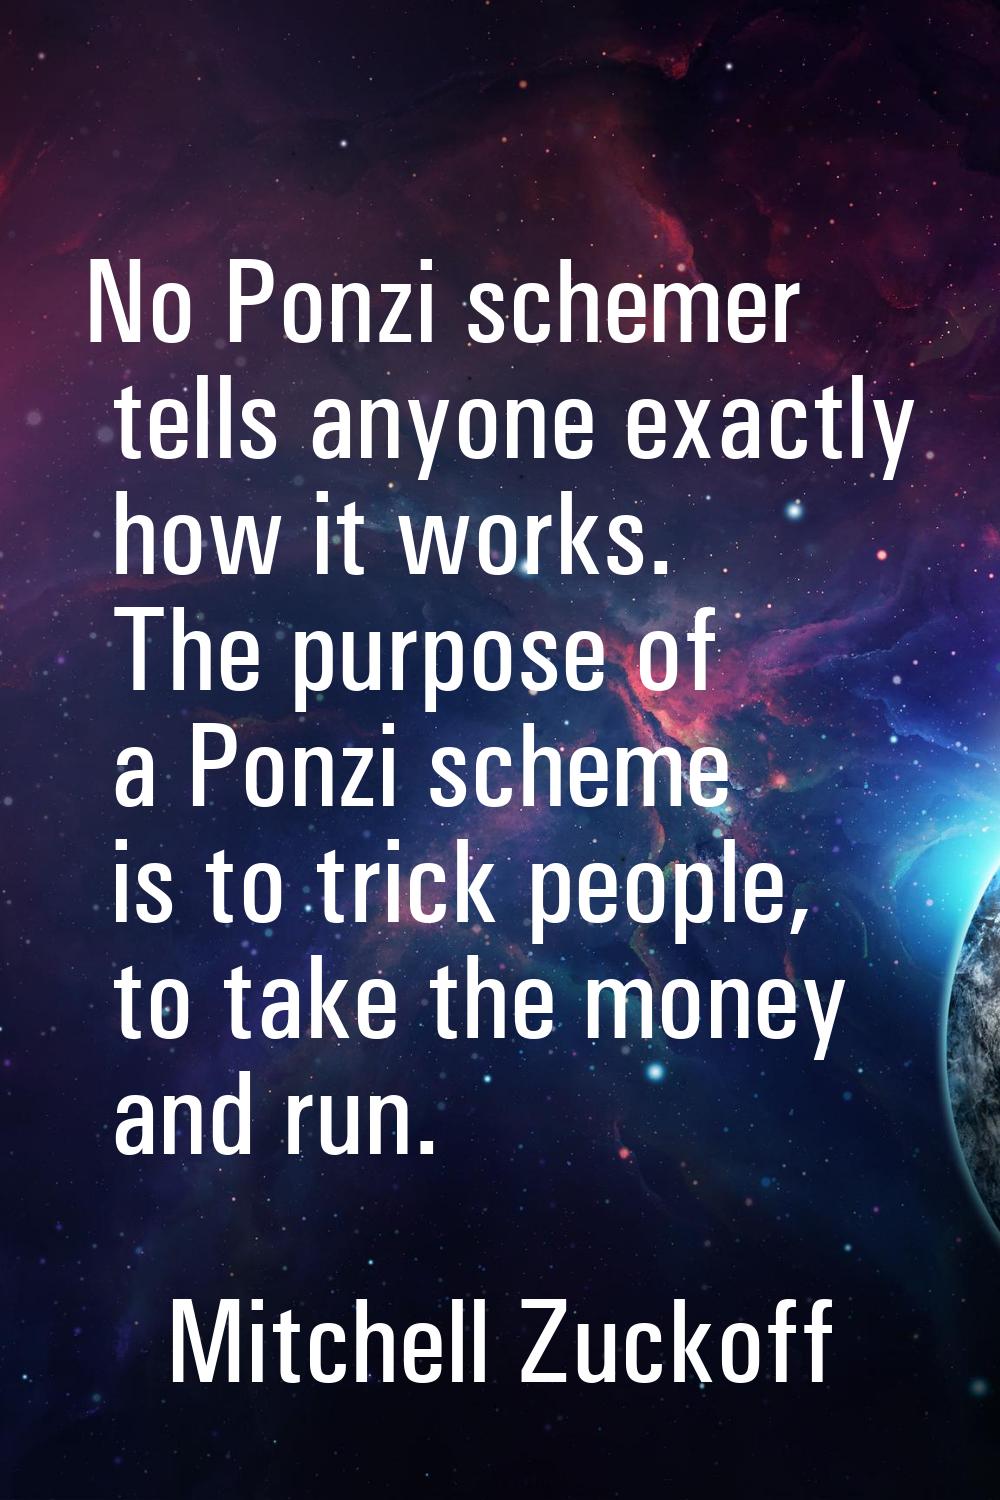 No Ponzi schemer tells anyone exactly how it works. The purpose of a Ponzi scheme is to trick peopl